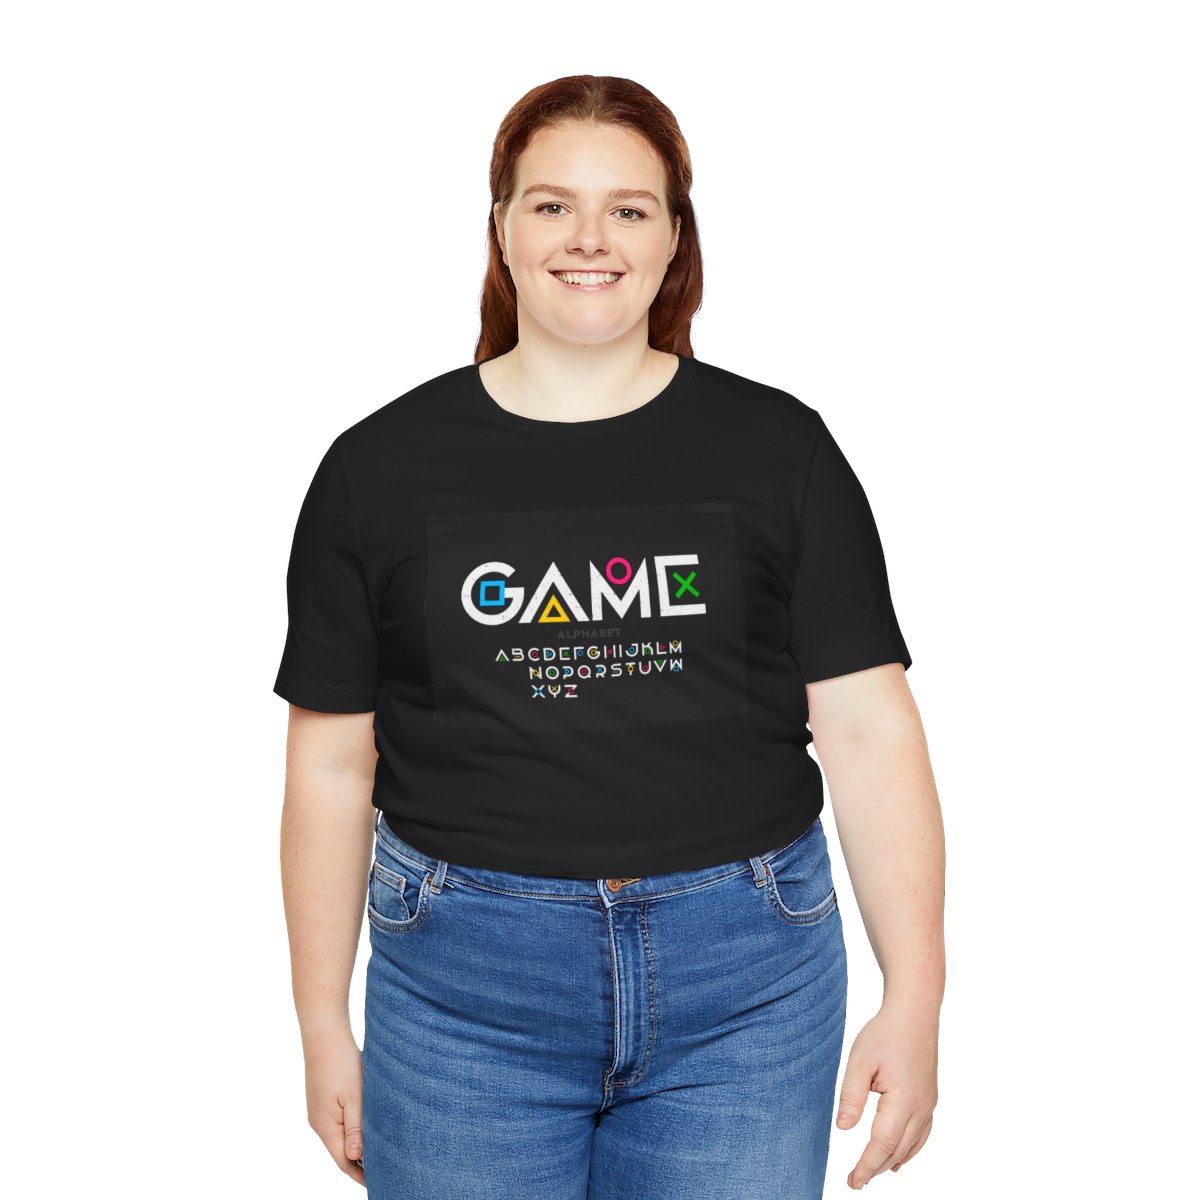 Unisex Jersey Short Sleeve Tee - Video Games product thumbnail image